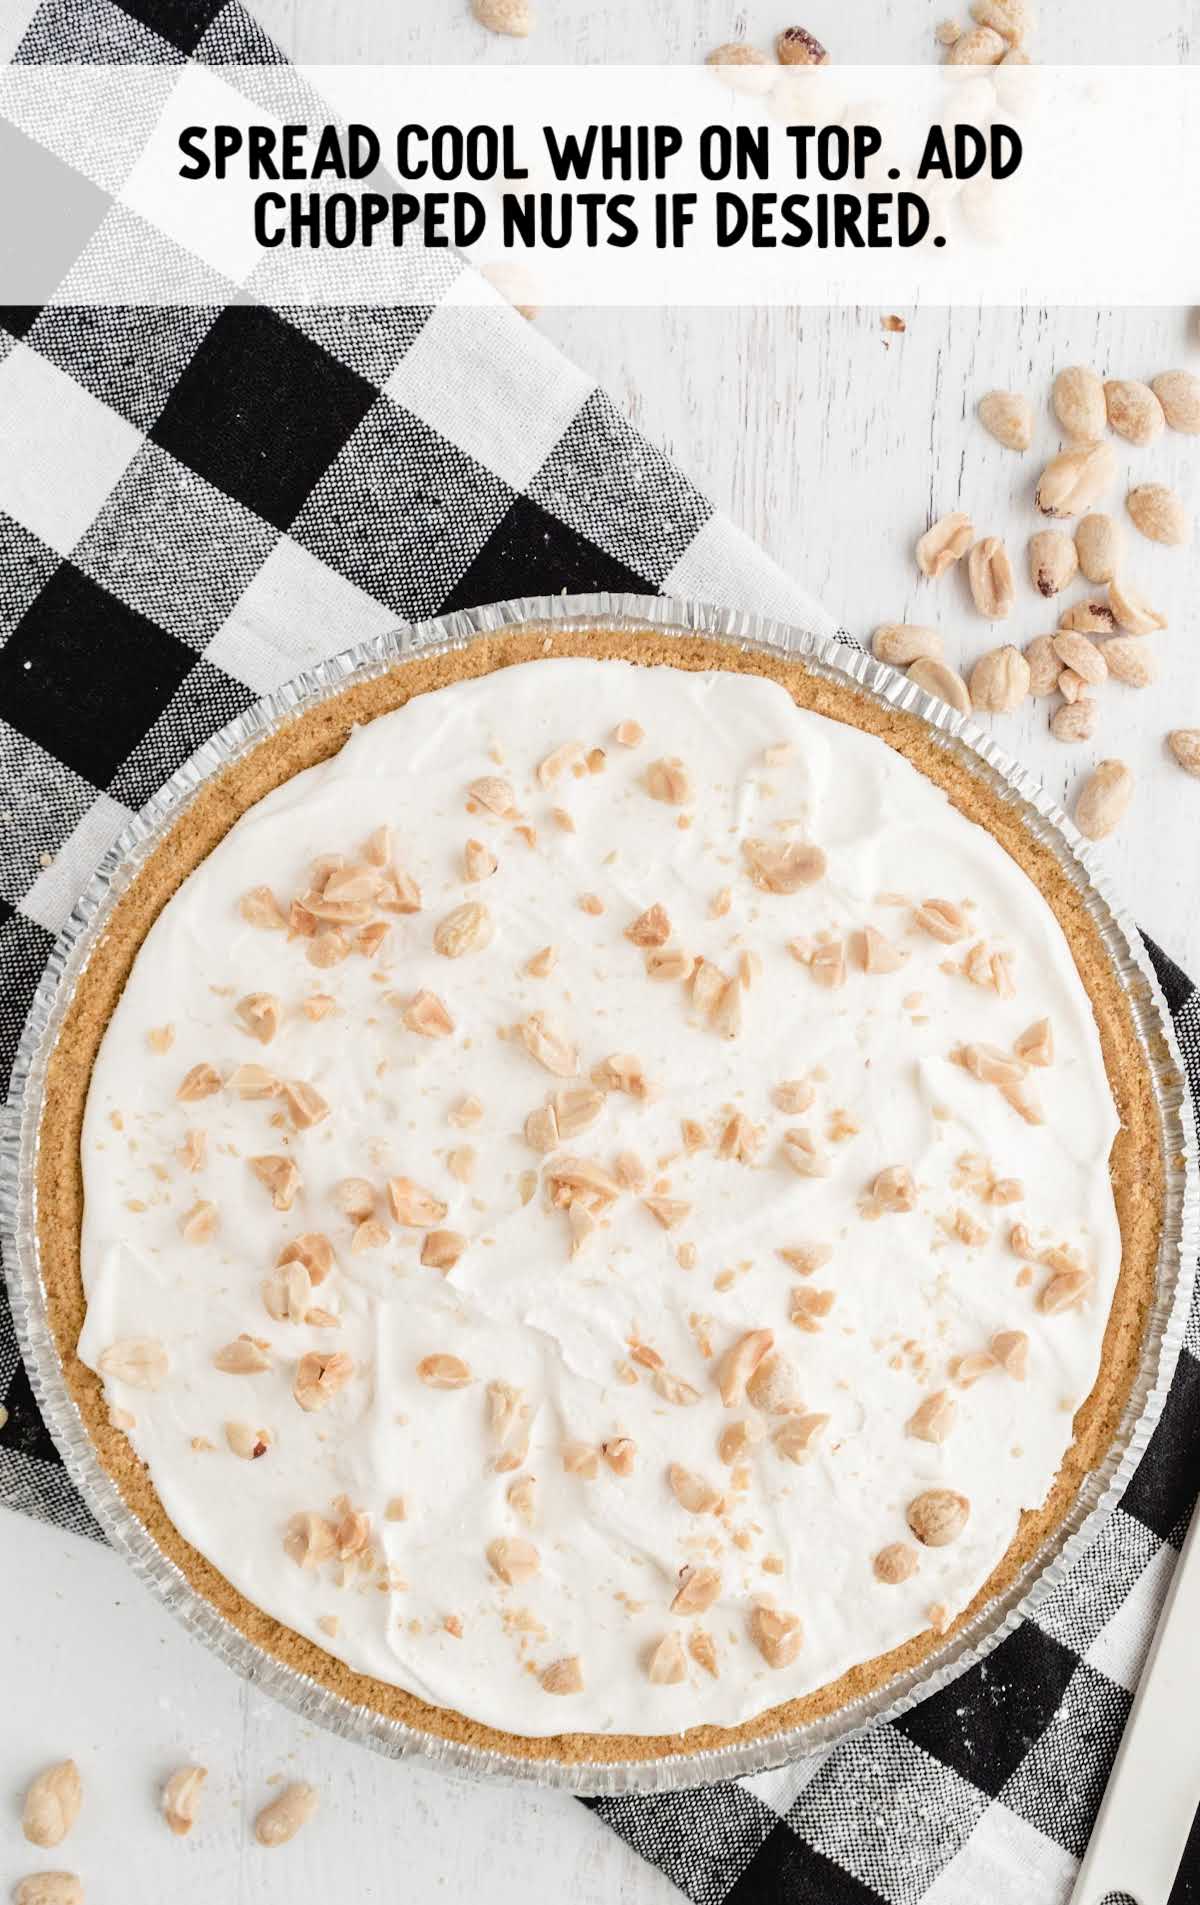 cool whip spread on top and add chopped nuts